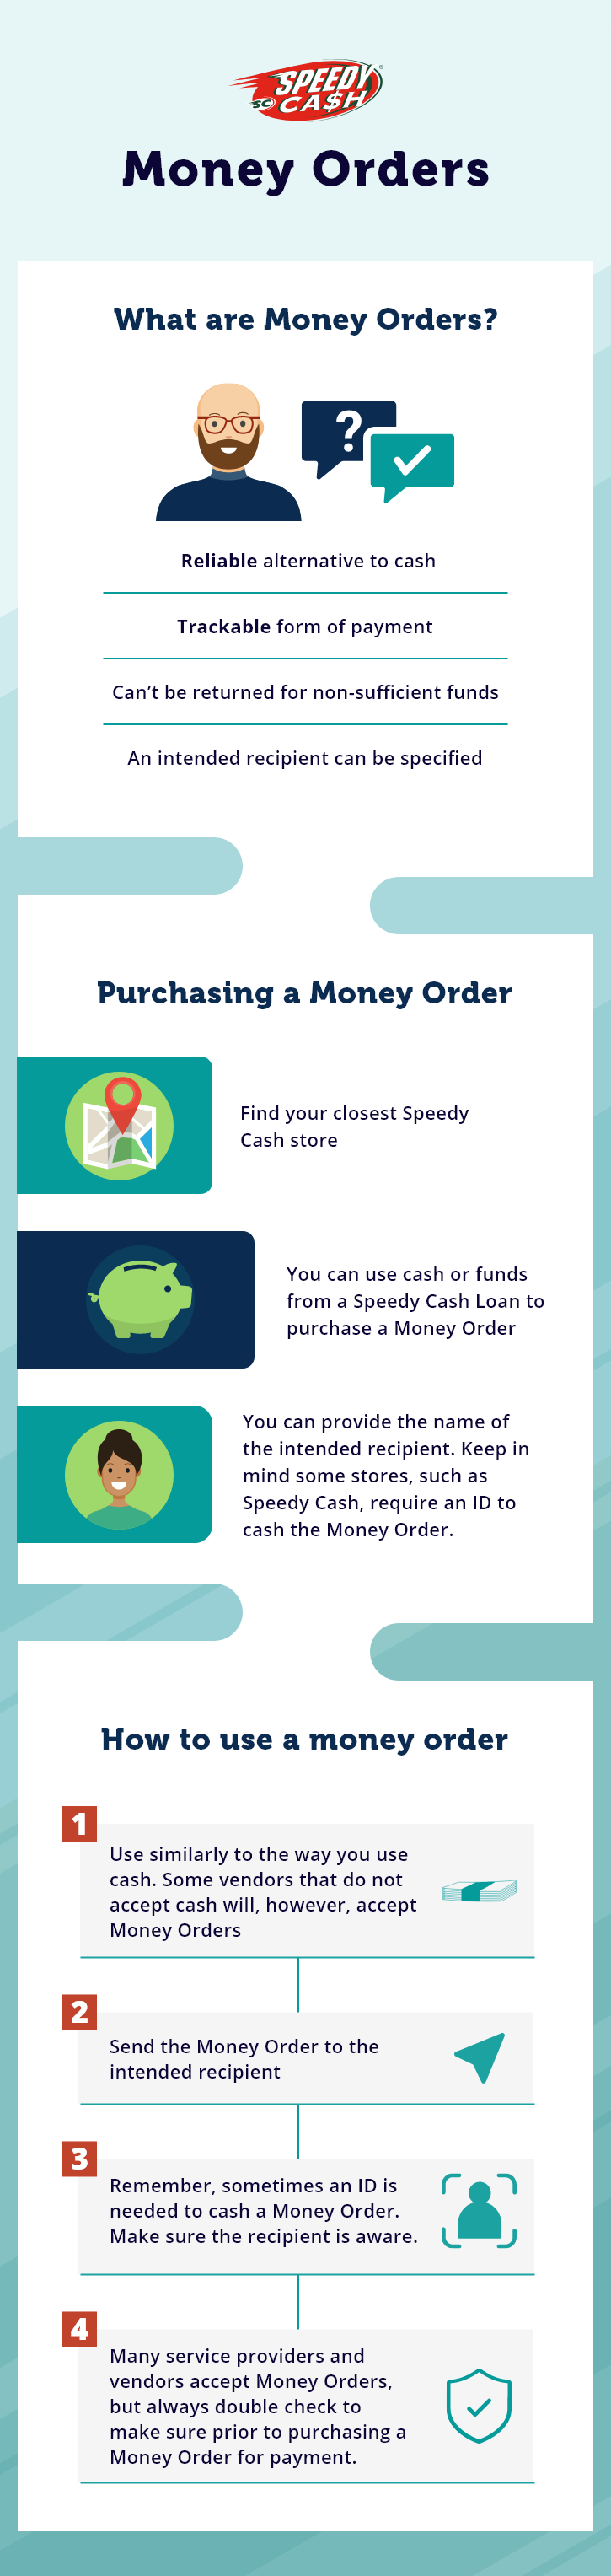 how to use a money order